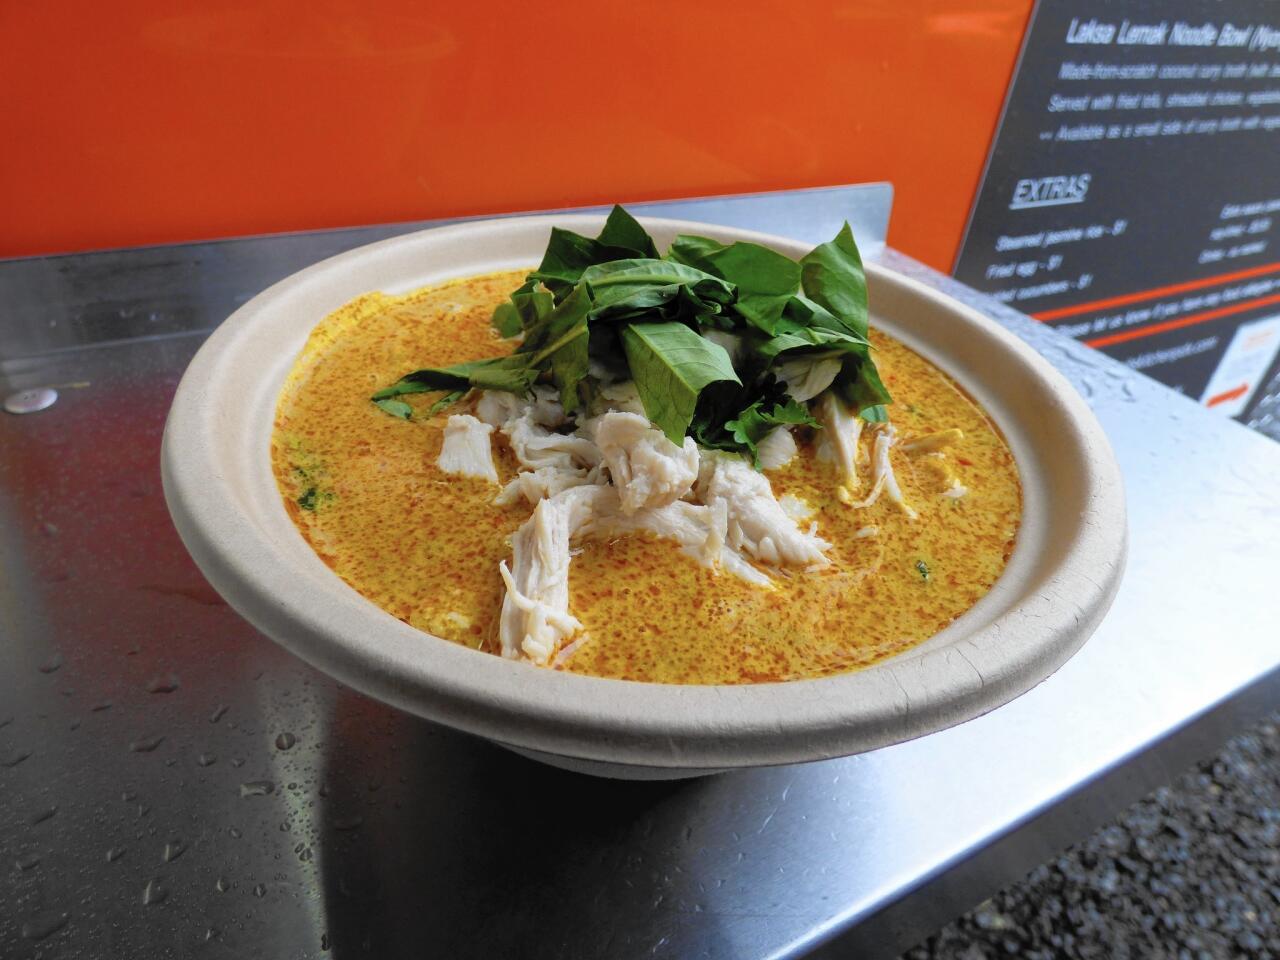 Laksa lemak, a noodle dish of the Baba-Nyonya people from the western coast of Malaysia is made rich and smooth with coconut milk.